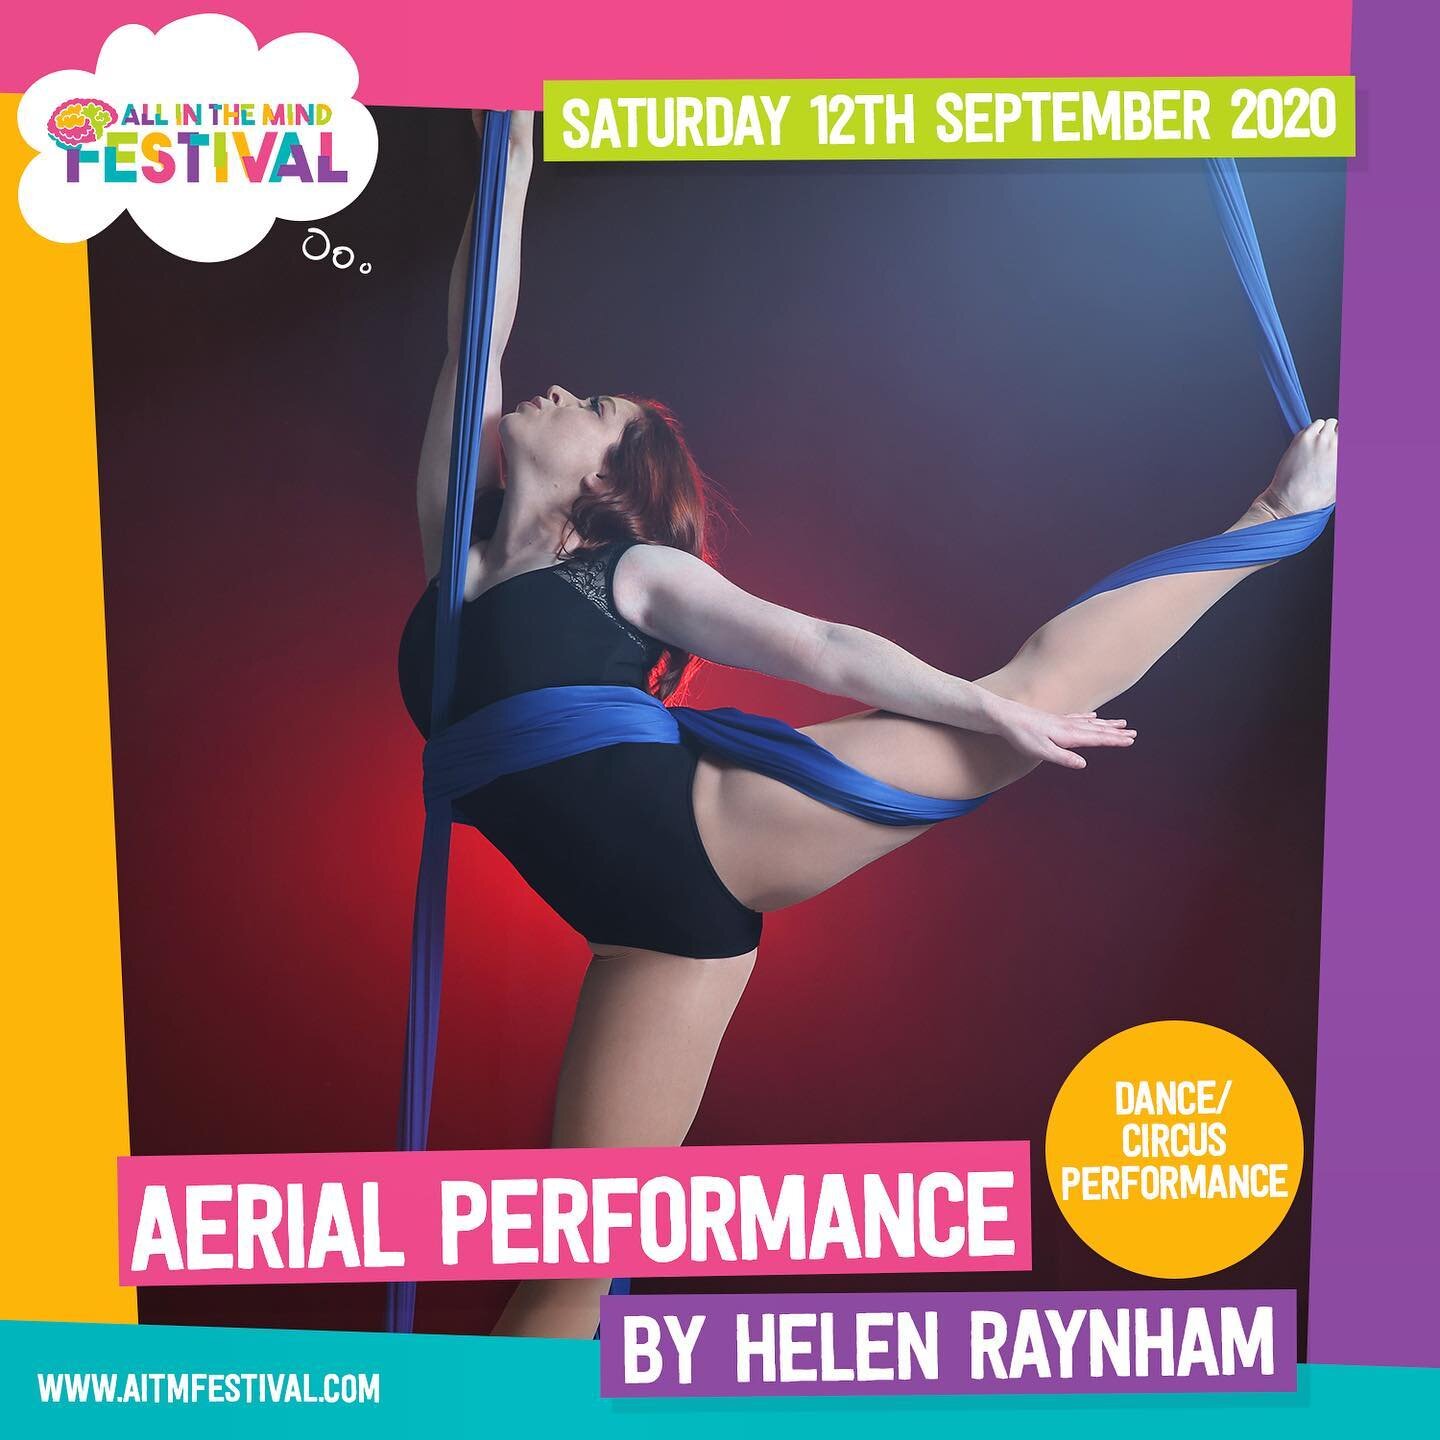 Performing today on my slings @aitmfest - an arts festival with a focus on mental health. This year they&rsquo;ve taken it online! you can find me here: www.aitmfestival.com in the Movement Meadow at 12pm. With music by  #indiaelectriccompany tickets